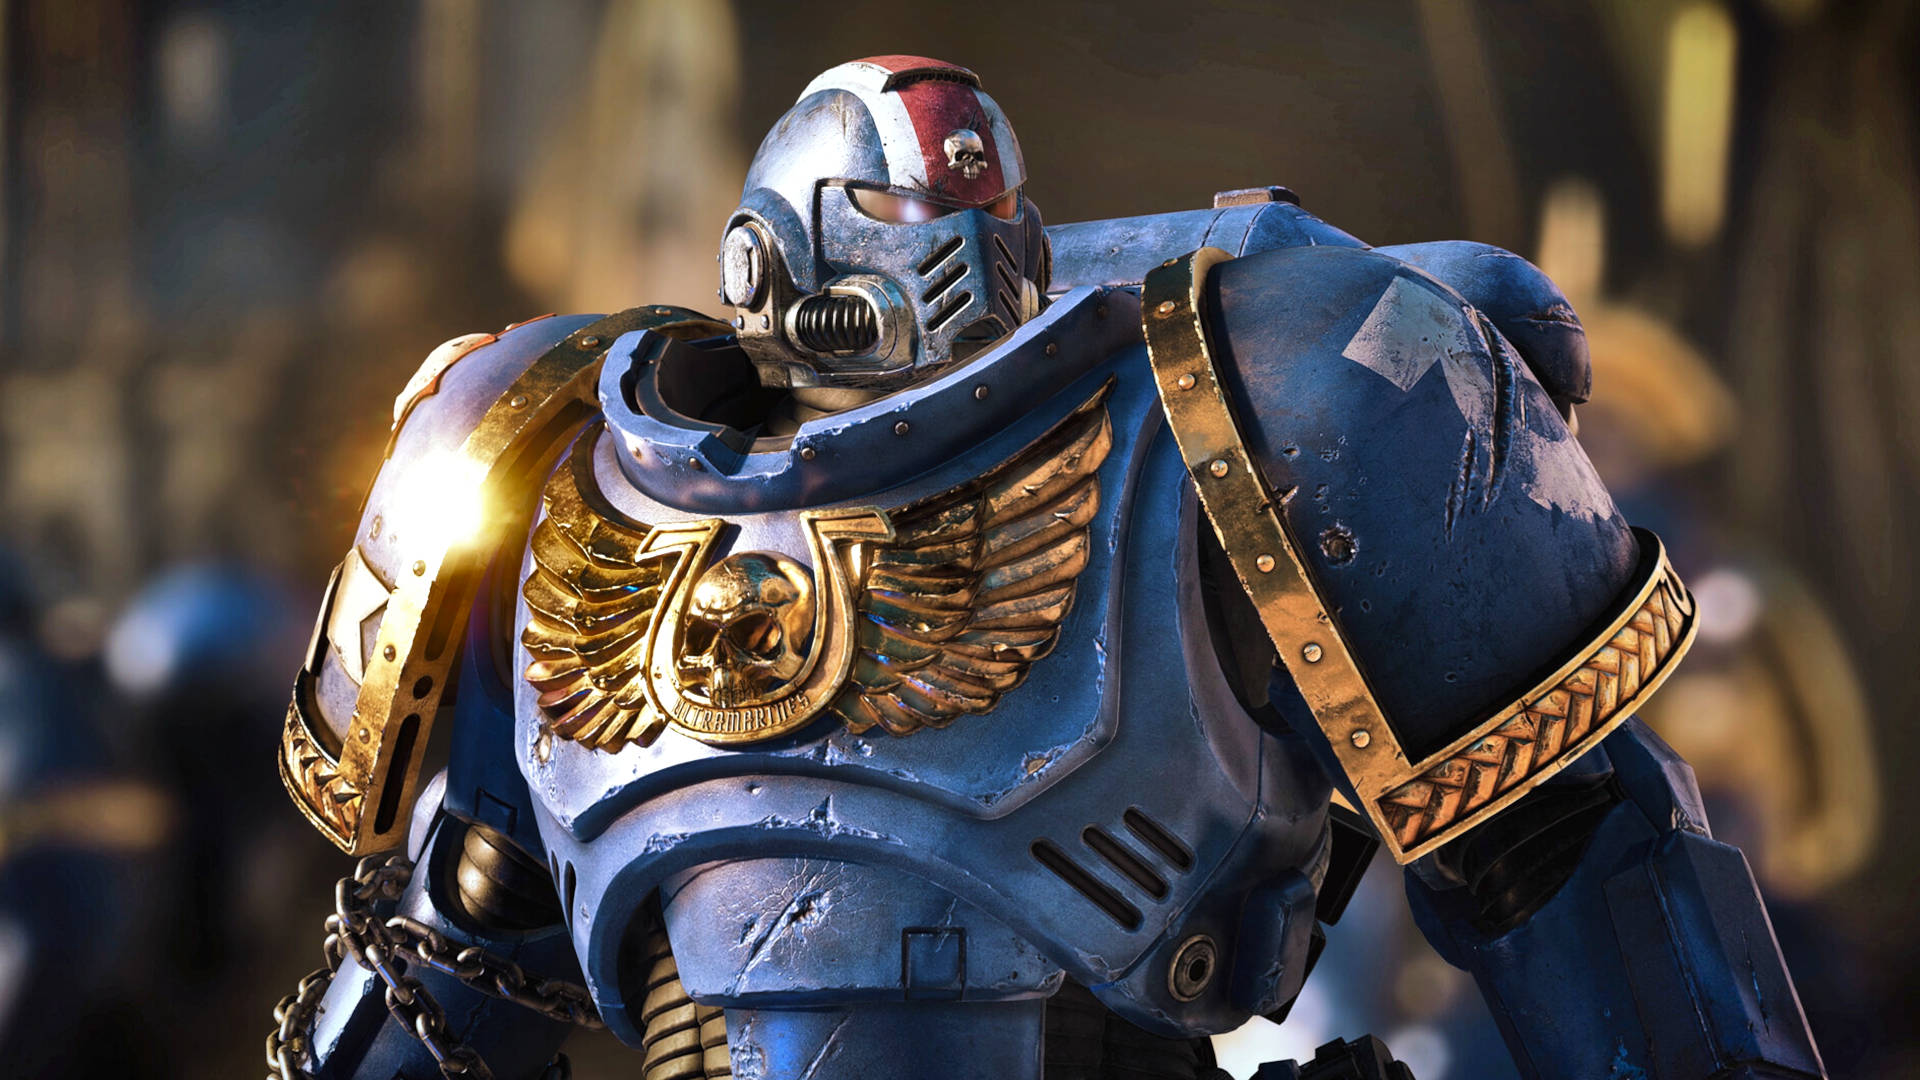 Warhammer 40k Space Marine 2 release date, story, latest news